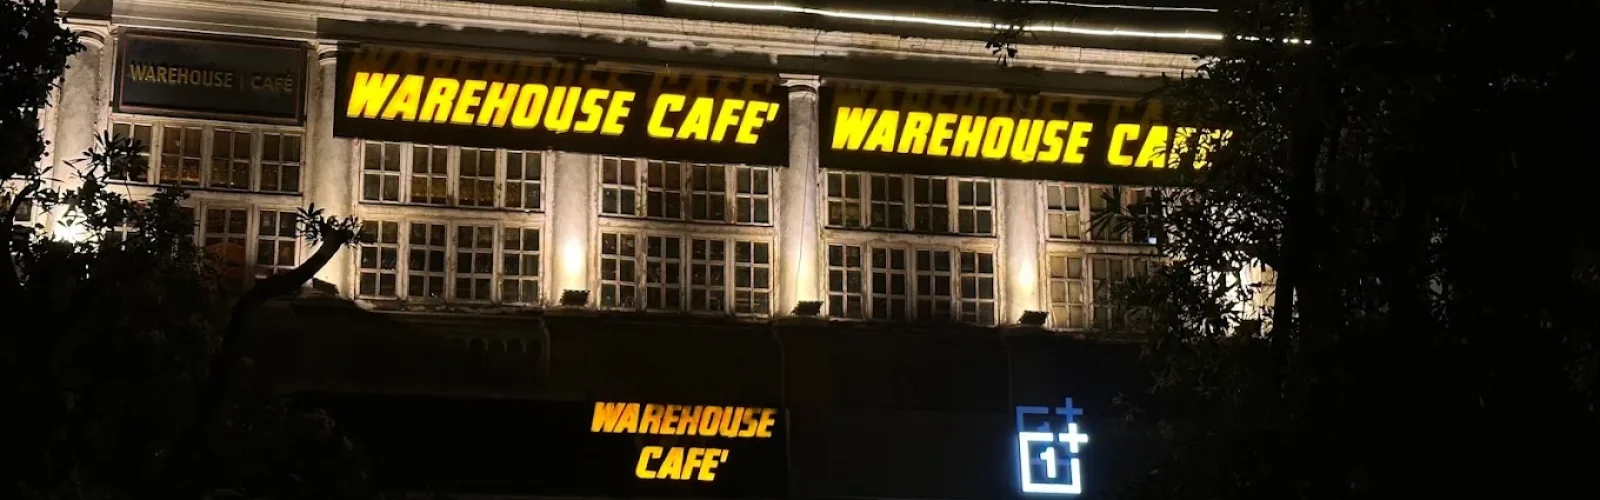 Warehouse Cafe cp